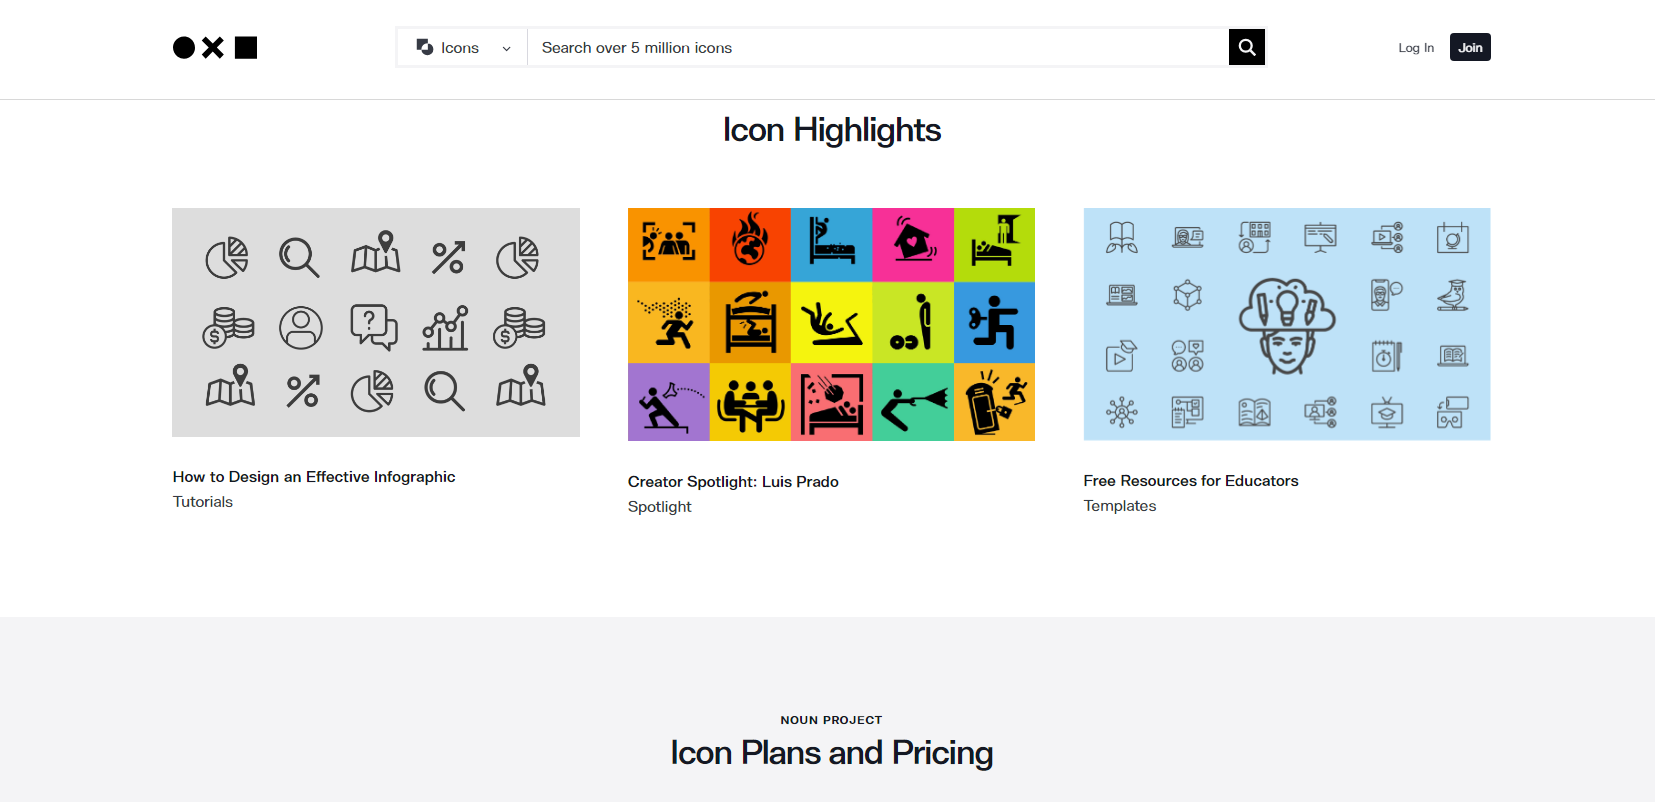 Icons for an online store a necessary element of UX design